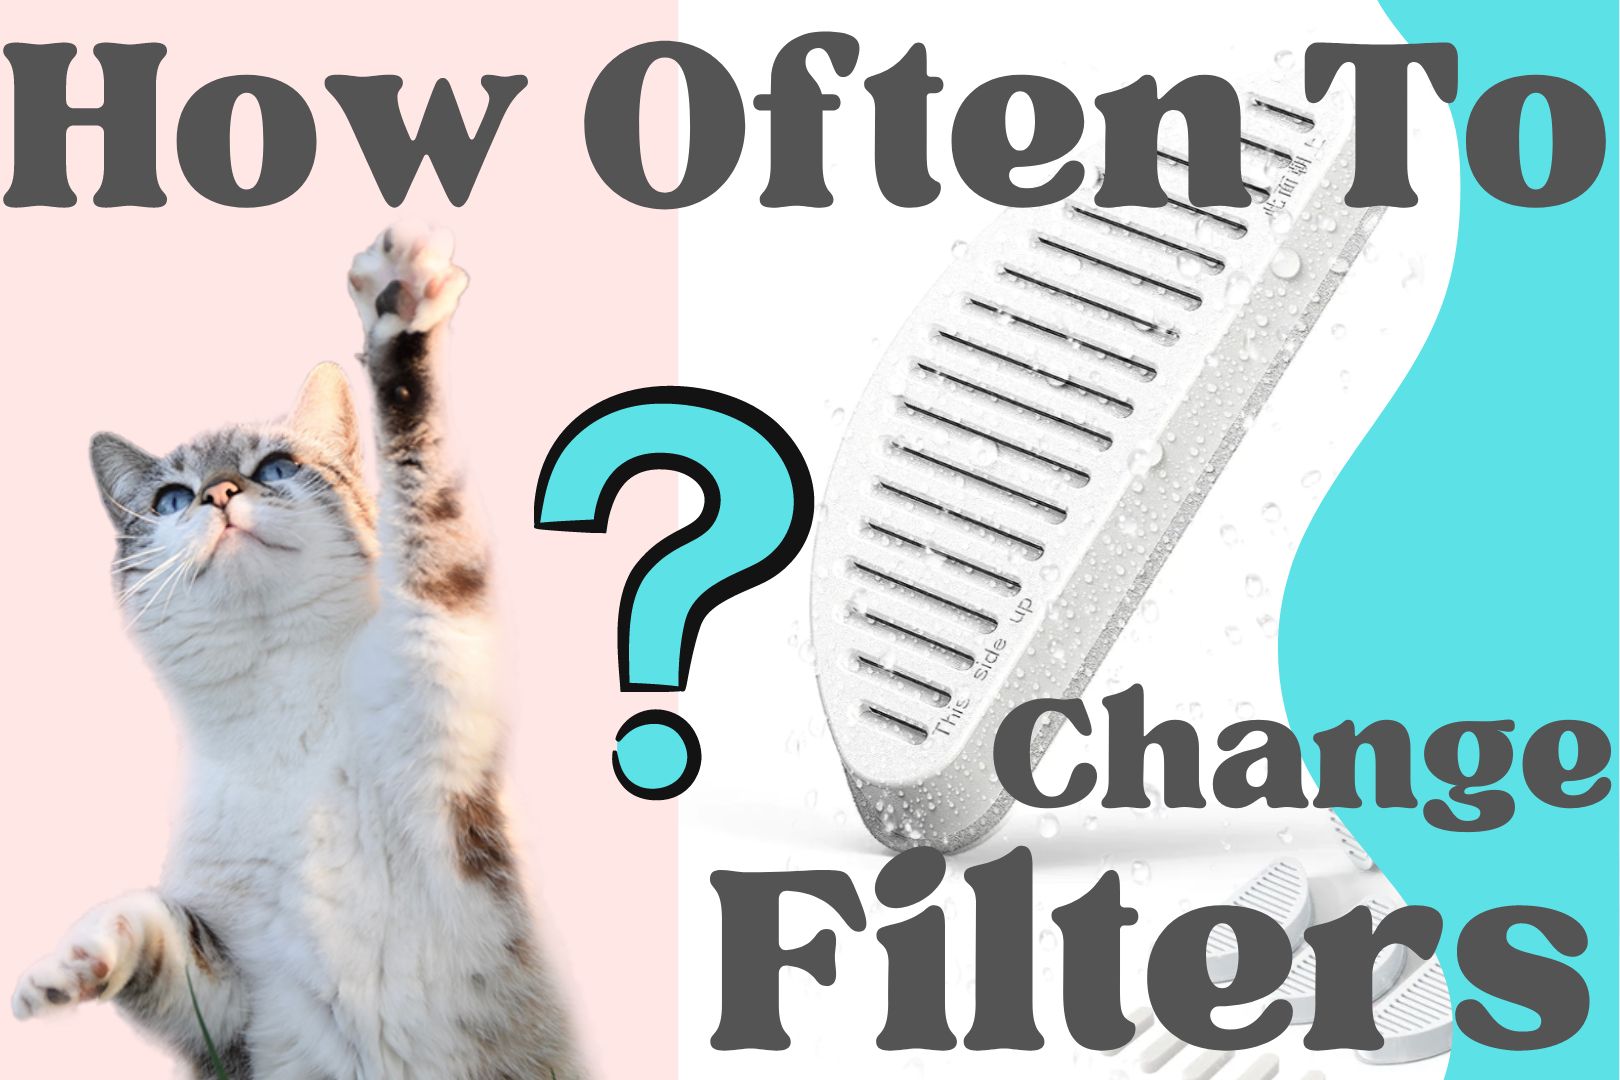 how often to change cat water fountain filters